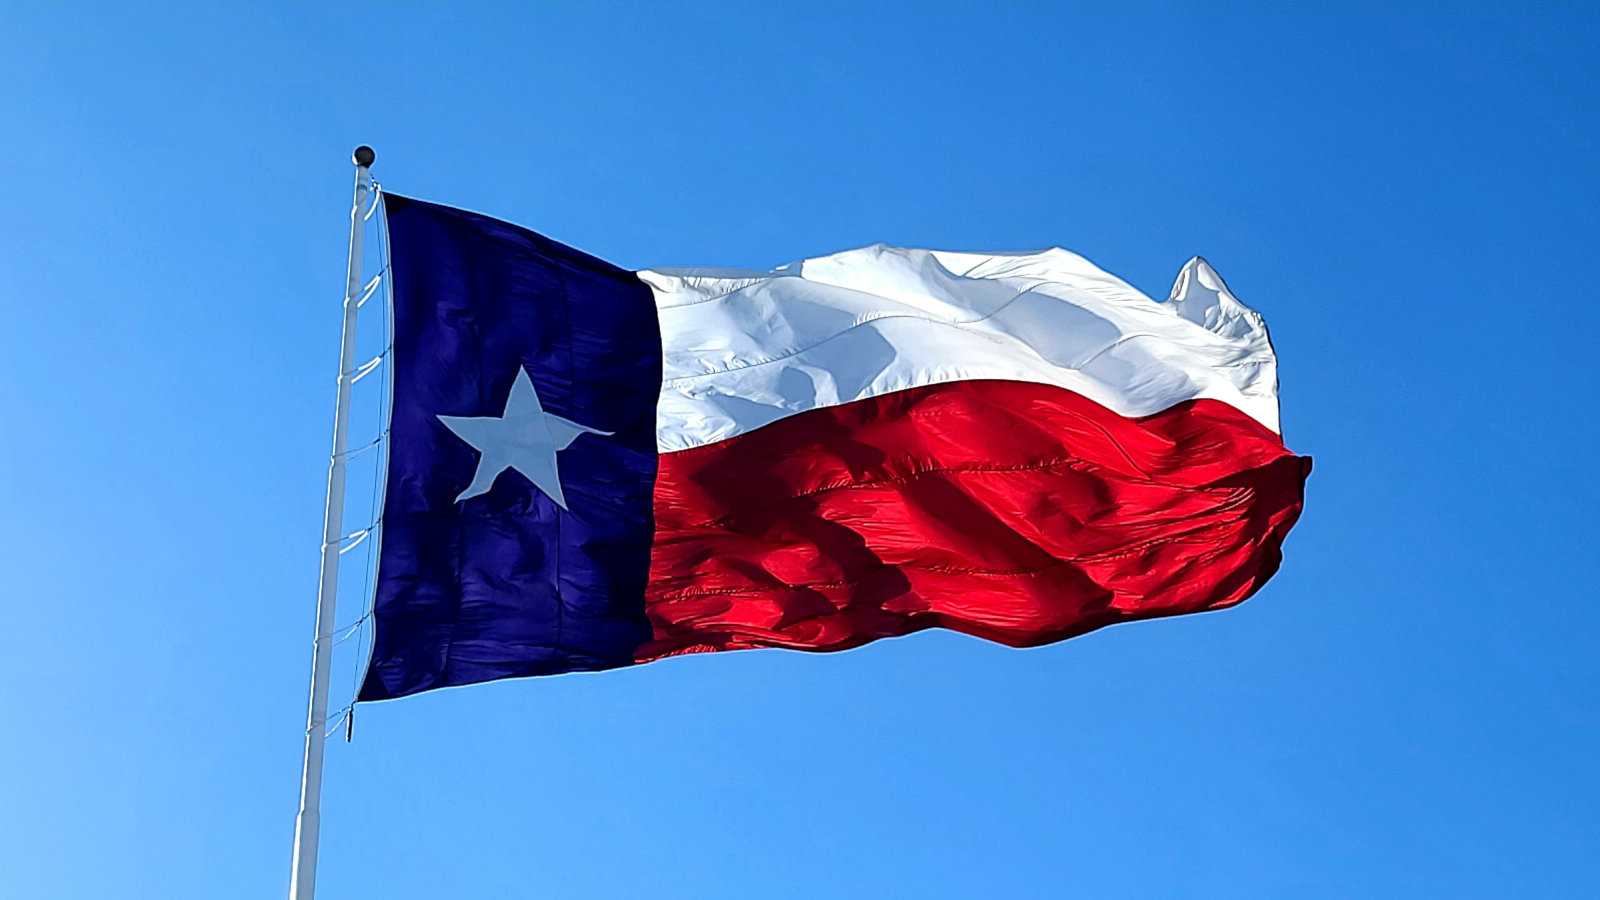 The big cities make Texas one of the gayest states in the USA